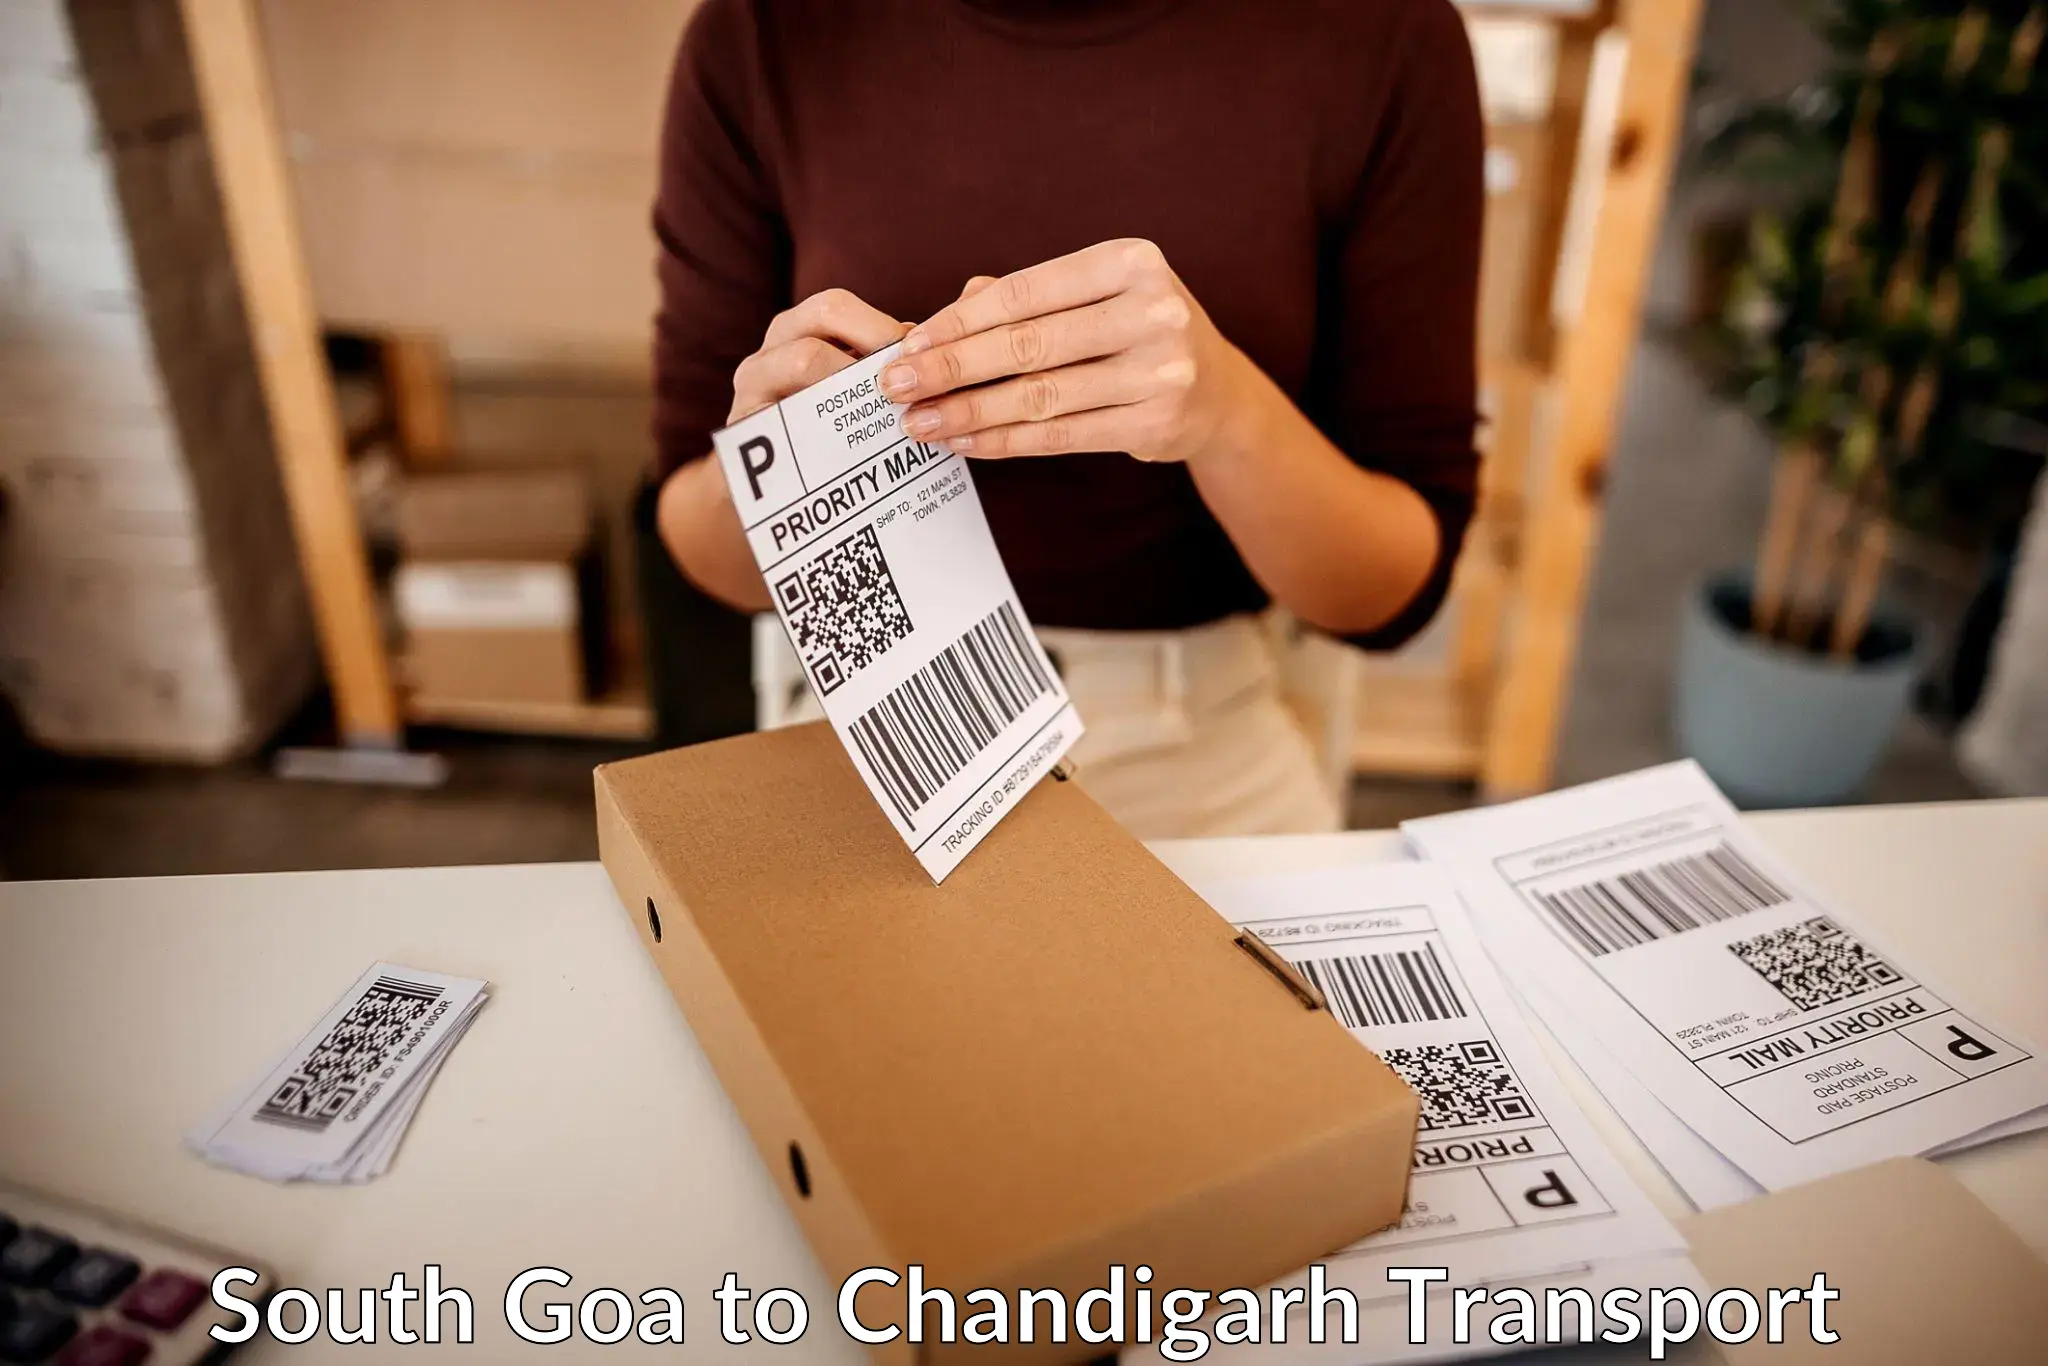 Vehicle transport services South Goa to Chandigarh